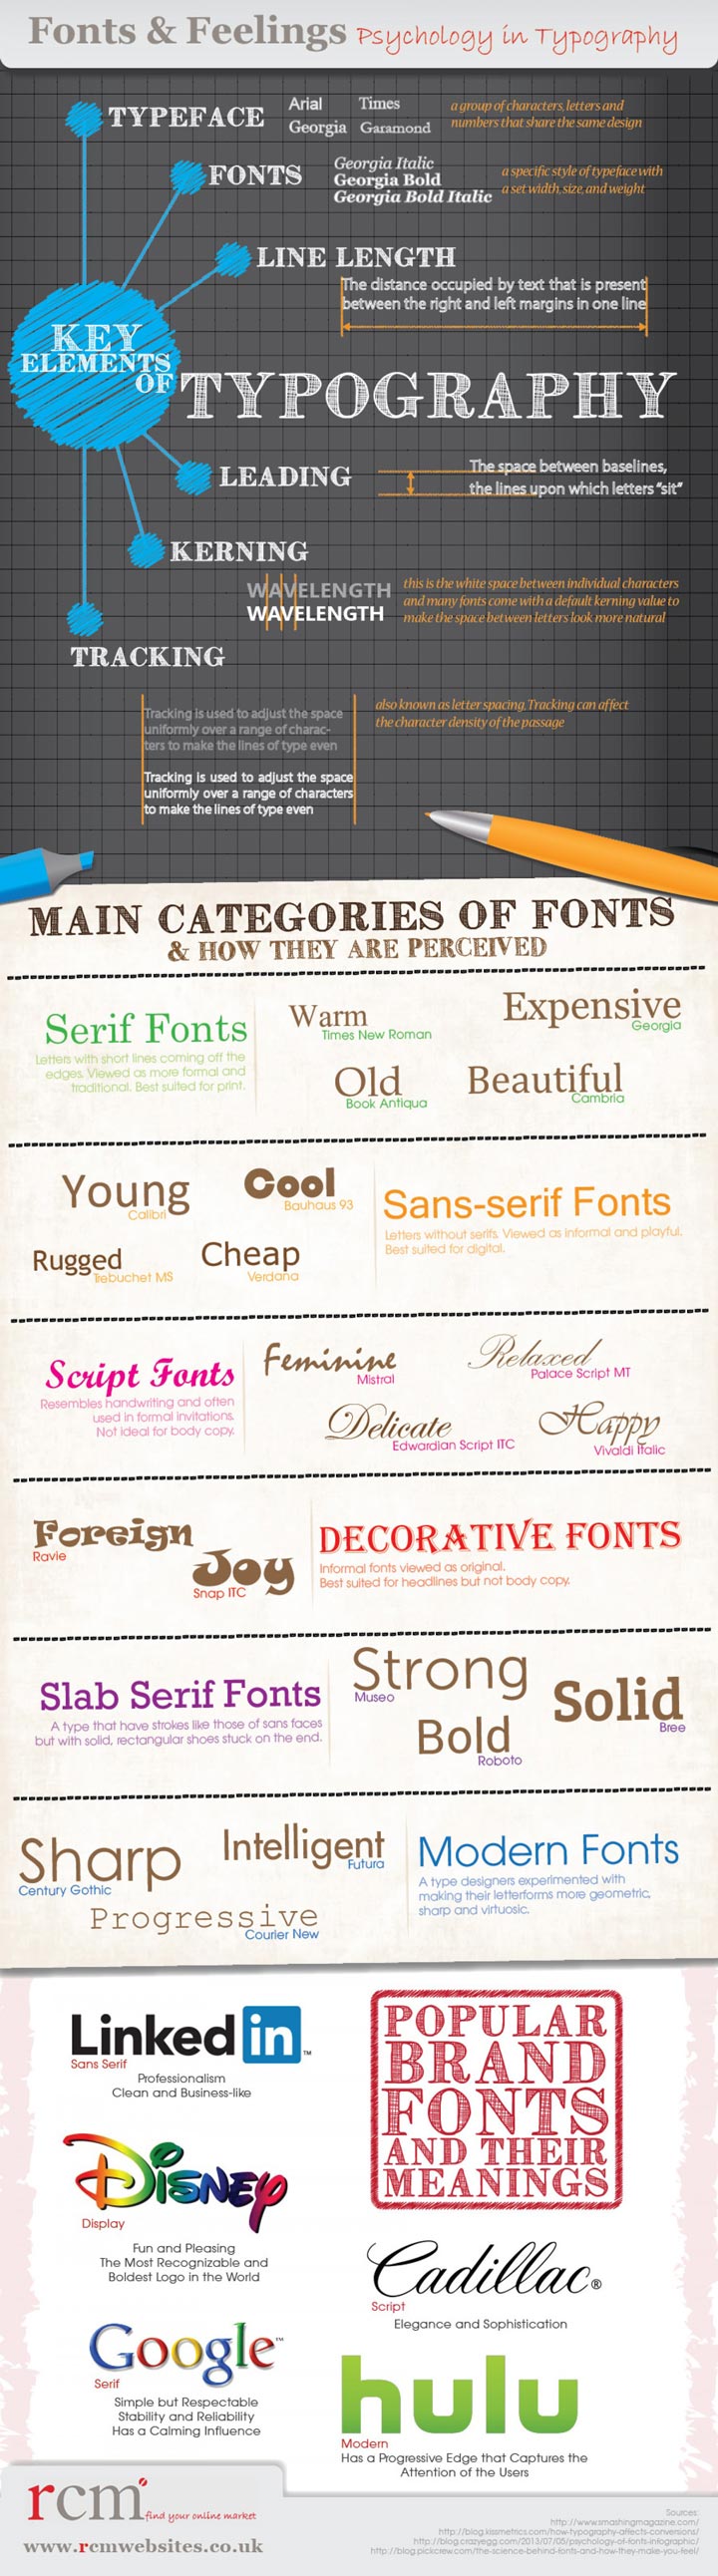 Fonts and Feelings: Psychology in Typography infographic